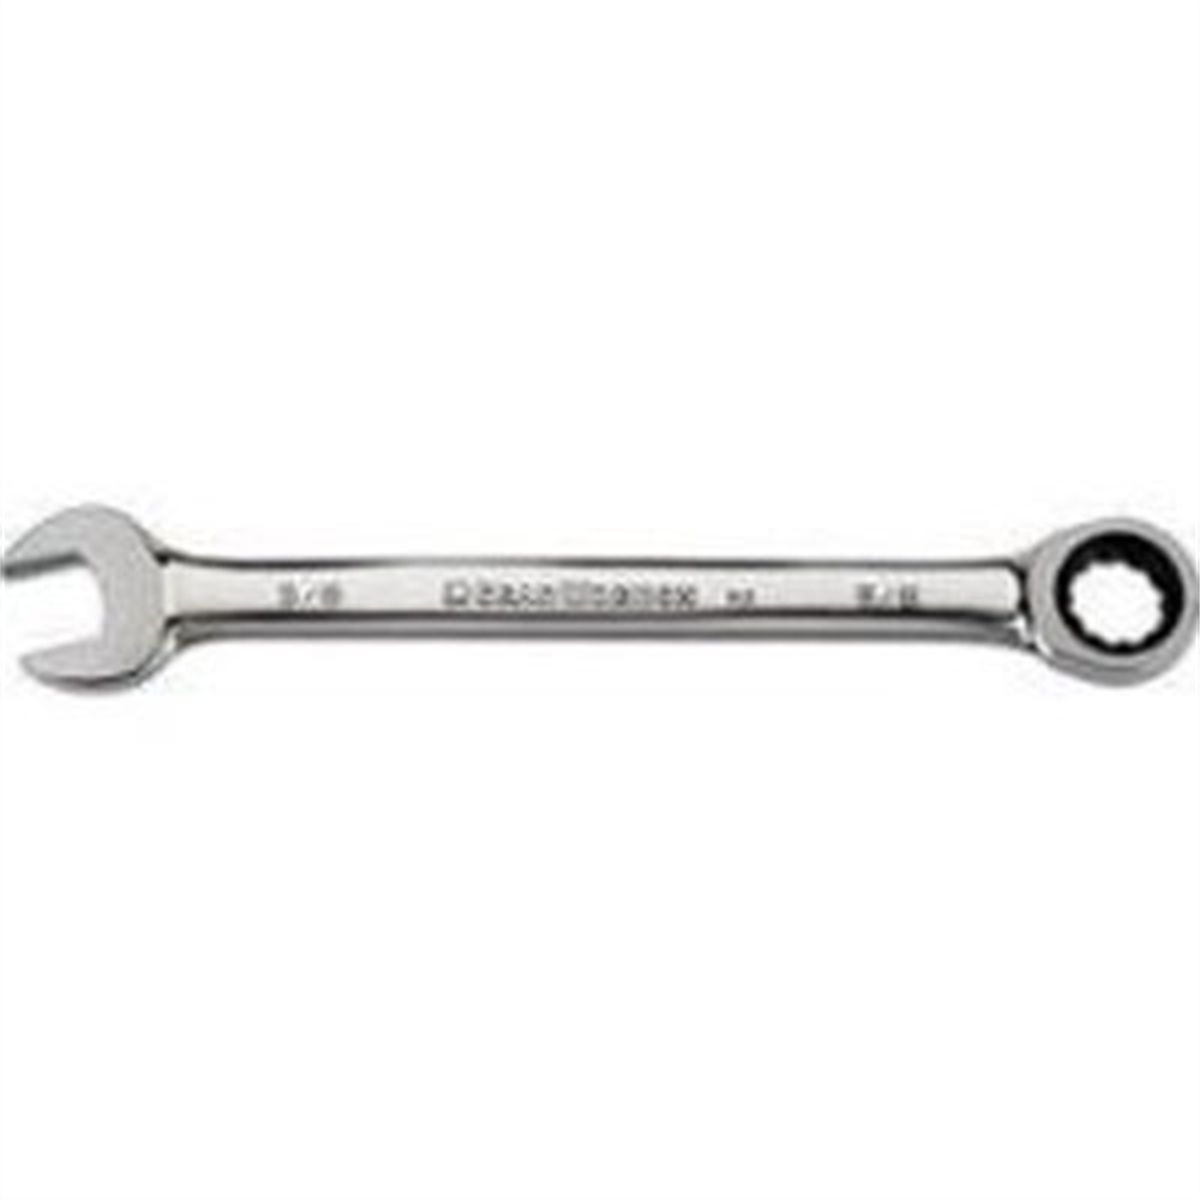 Combo GearWrench - 20mm